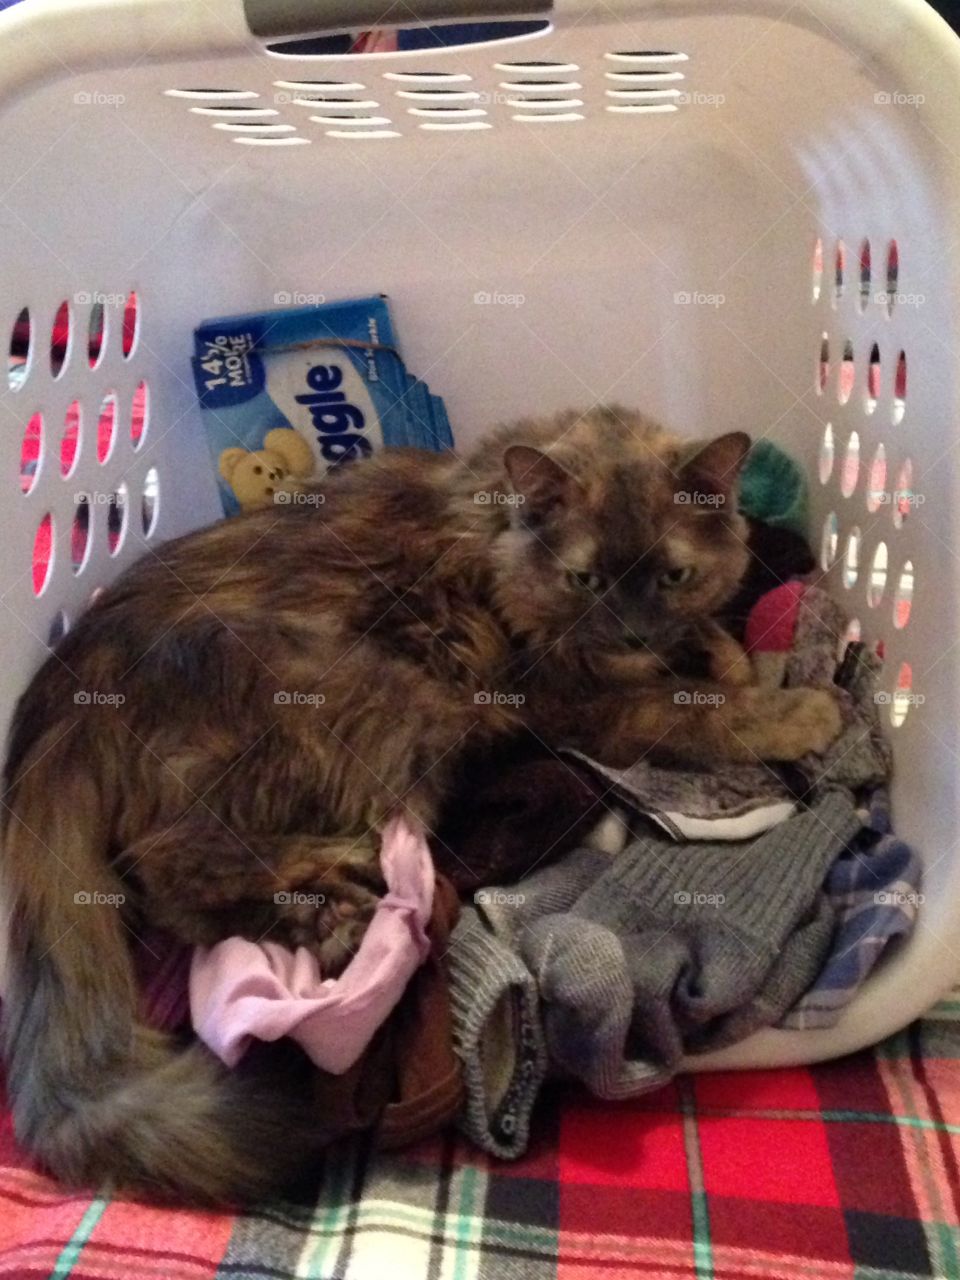 Kitty in the laundry basket